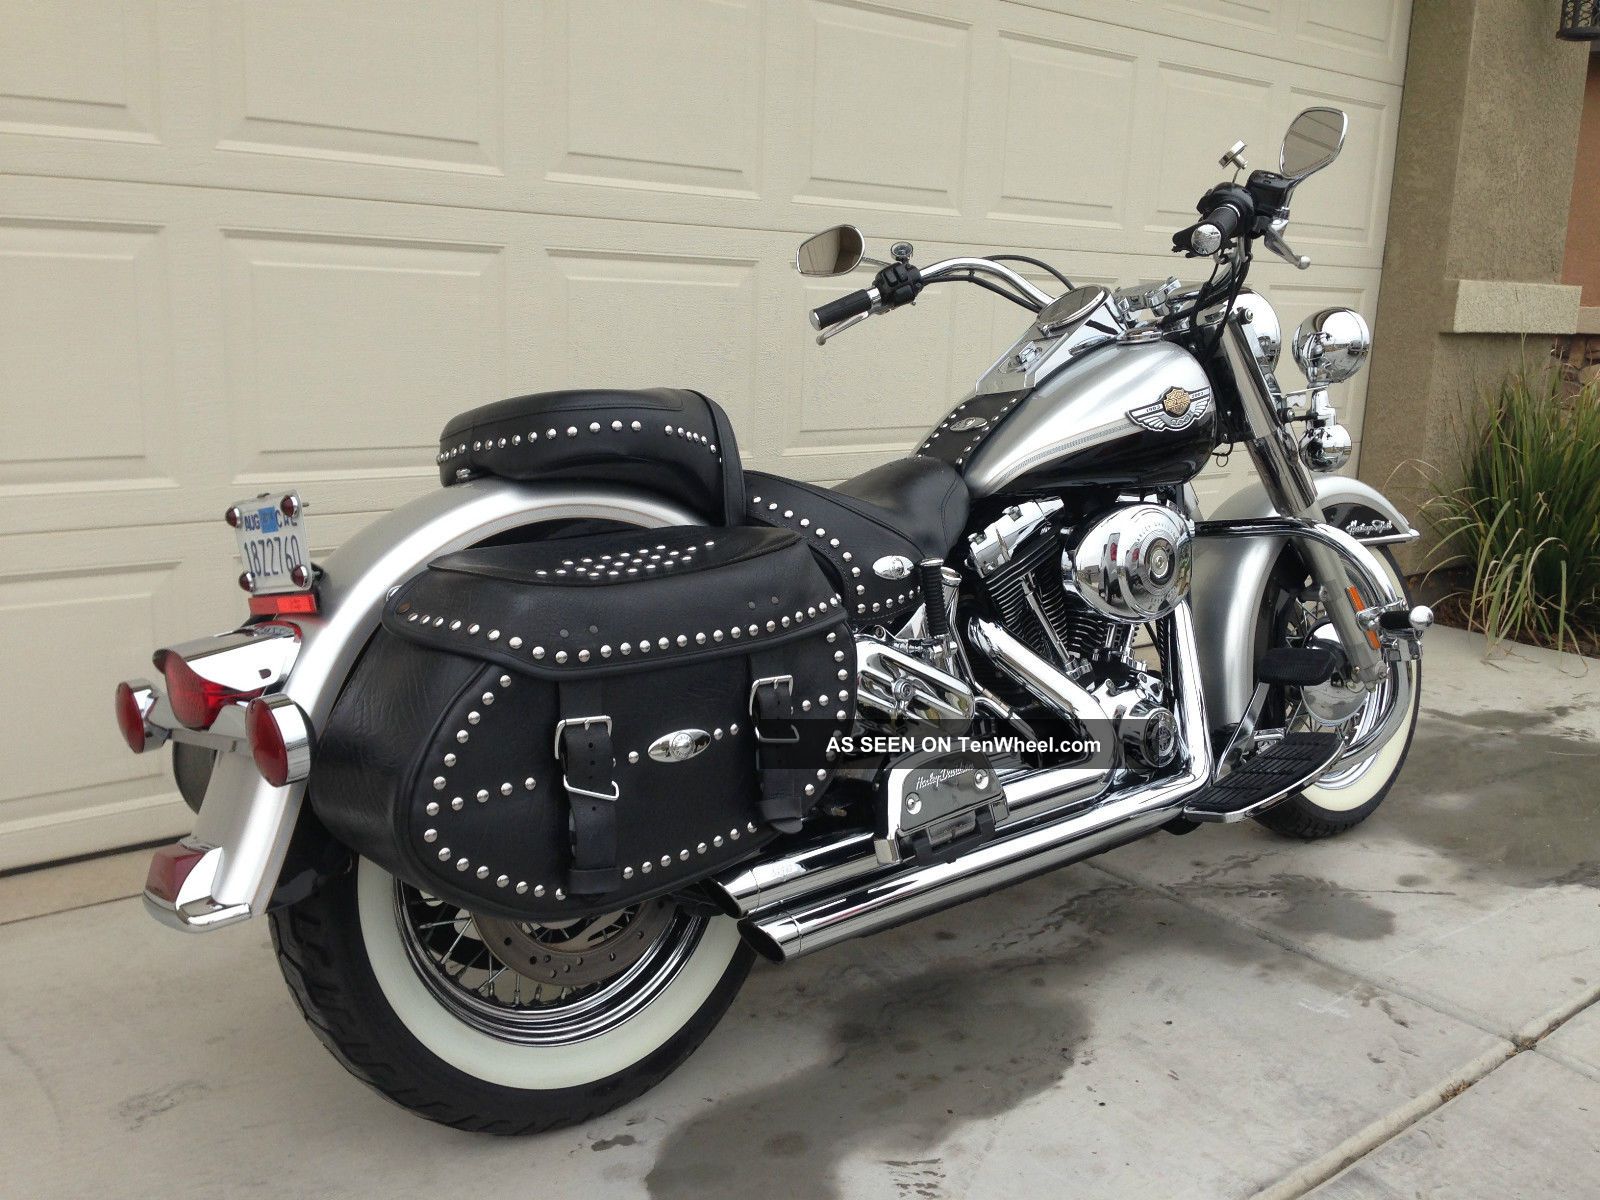 2003 Harley Davidson Heritage Softail 100th Anniversary Review